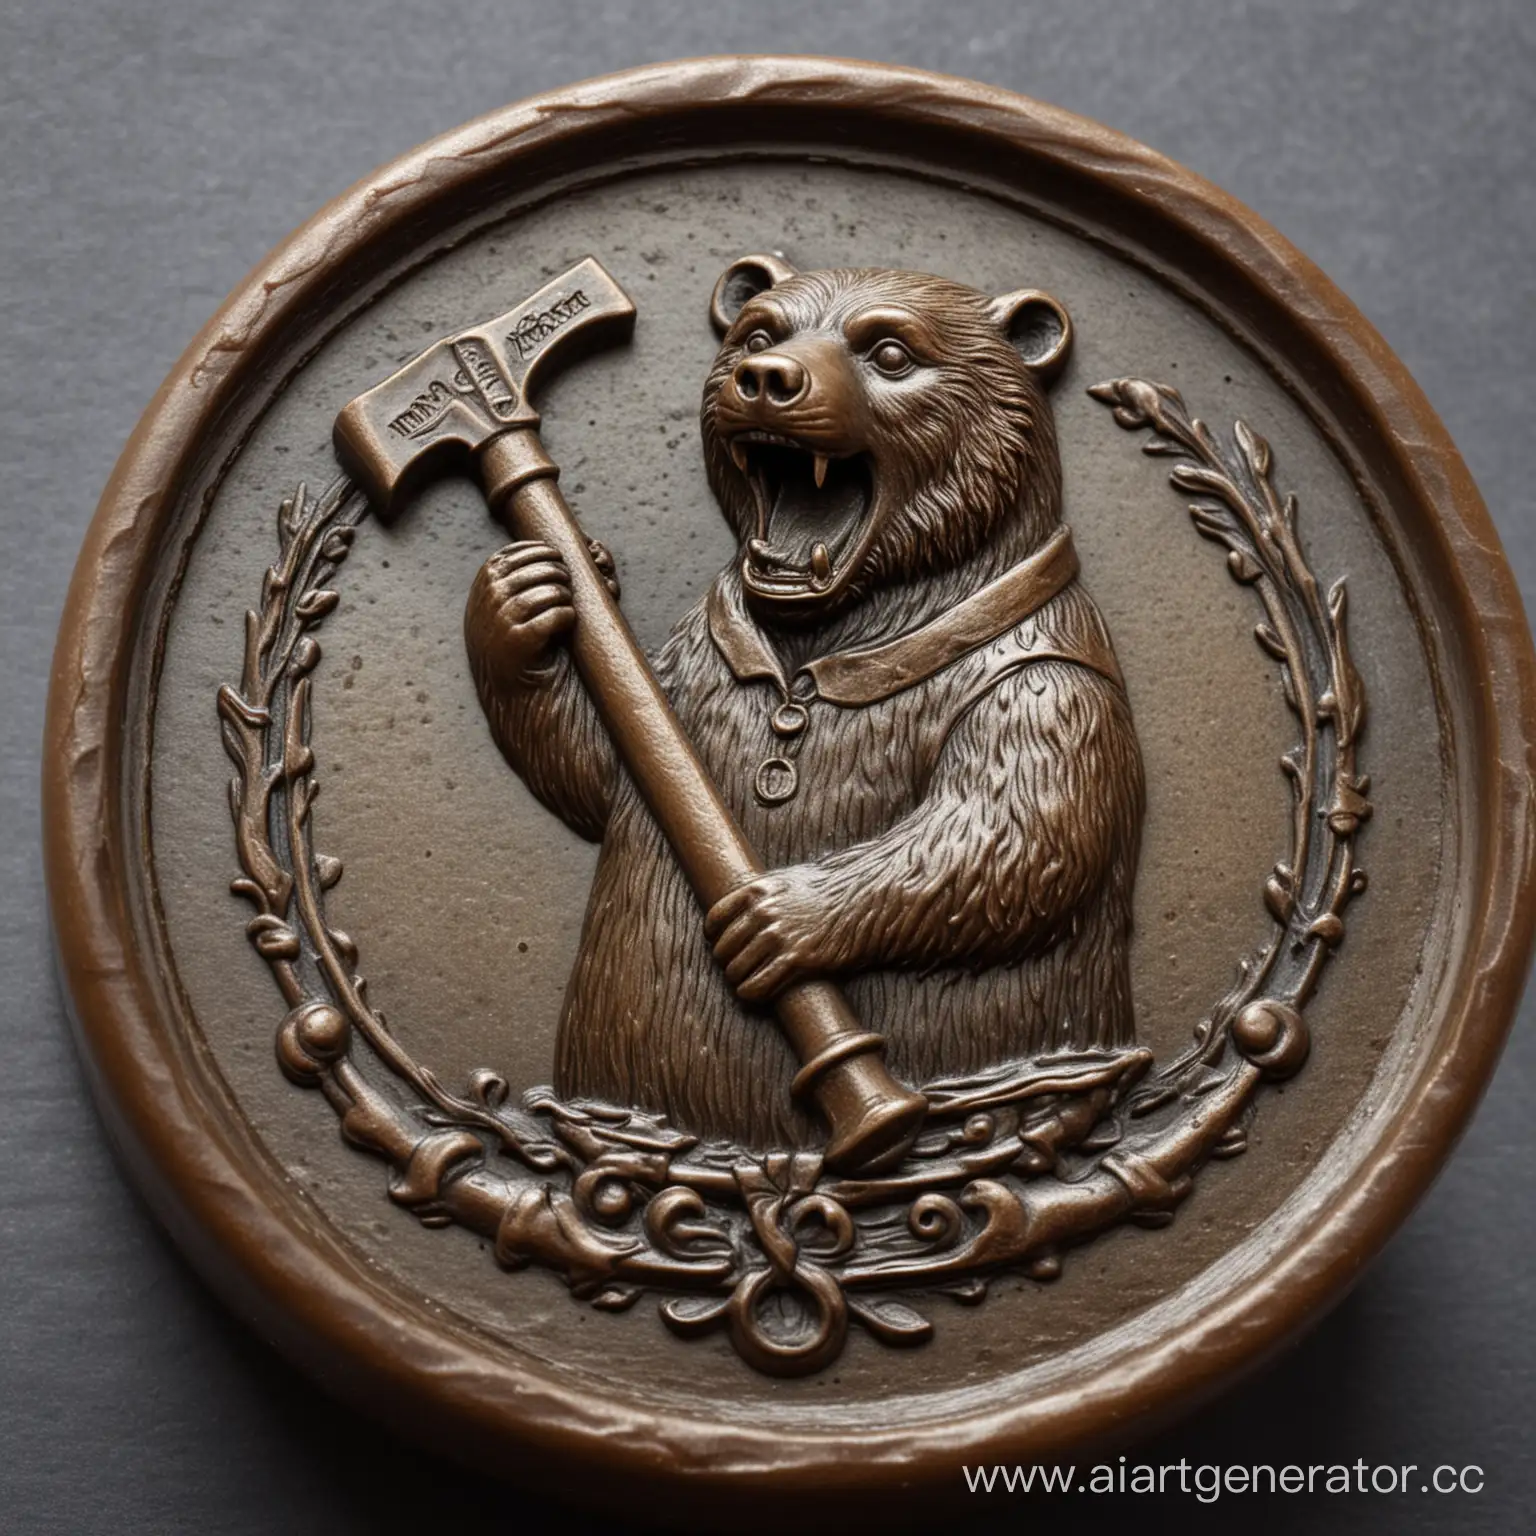 Bear-Seal-Ring-for-Wax-Sealing-with-Blacksmiths-Hammer